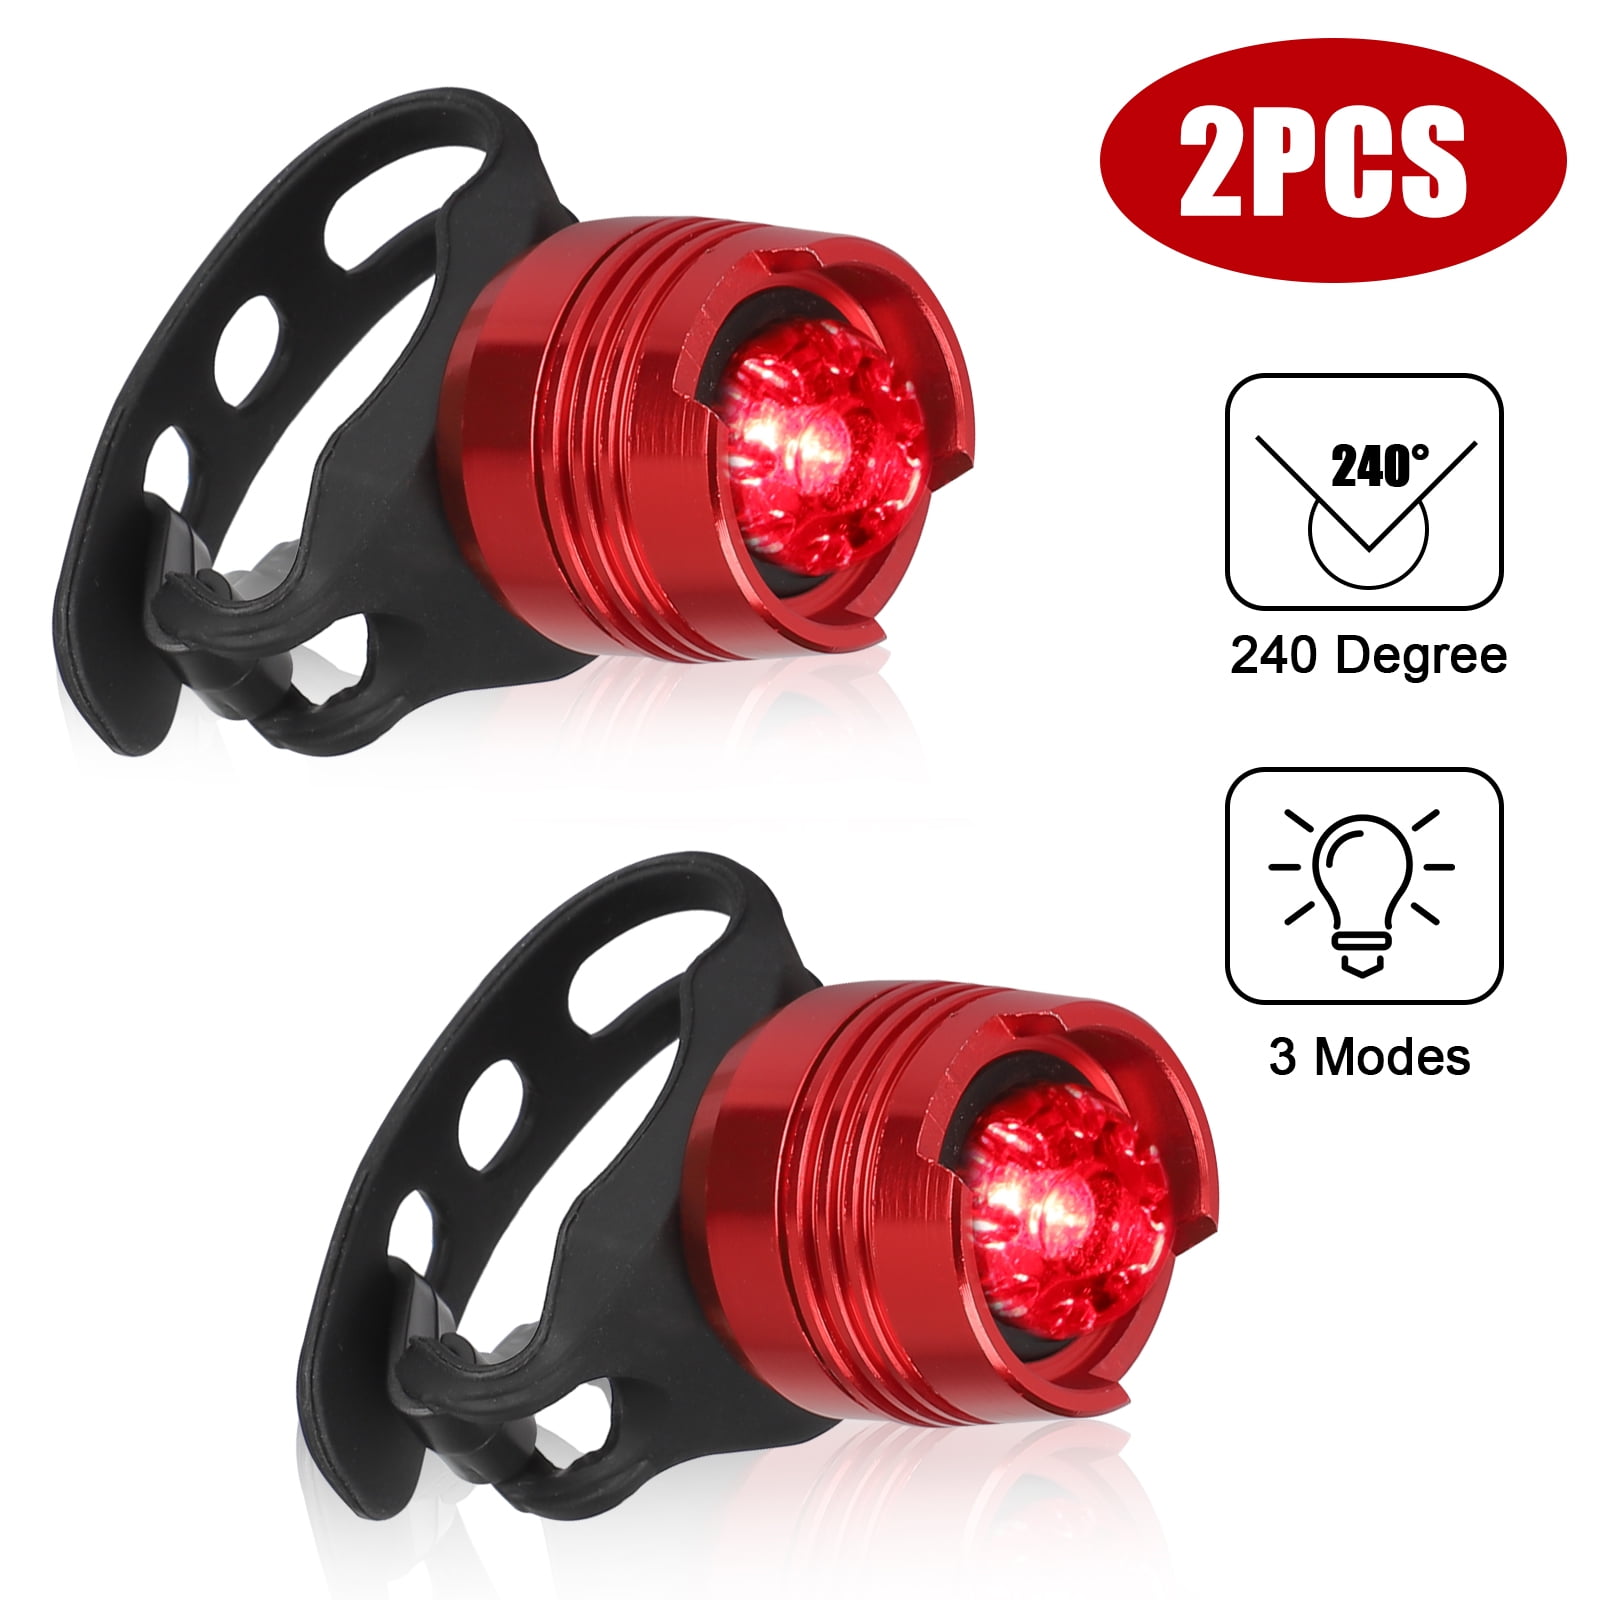 USB Rechargeable LED Safety Bicycle Tail Light Clip On Light Lamp Hiking A3GU 